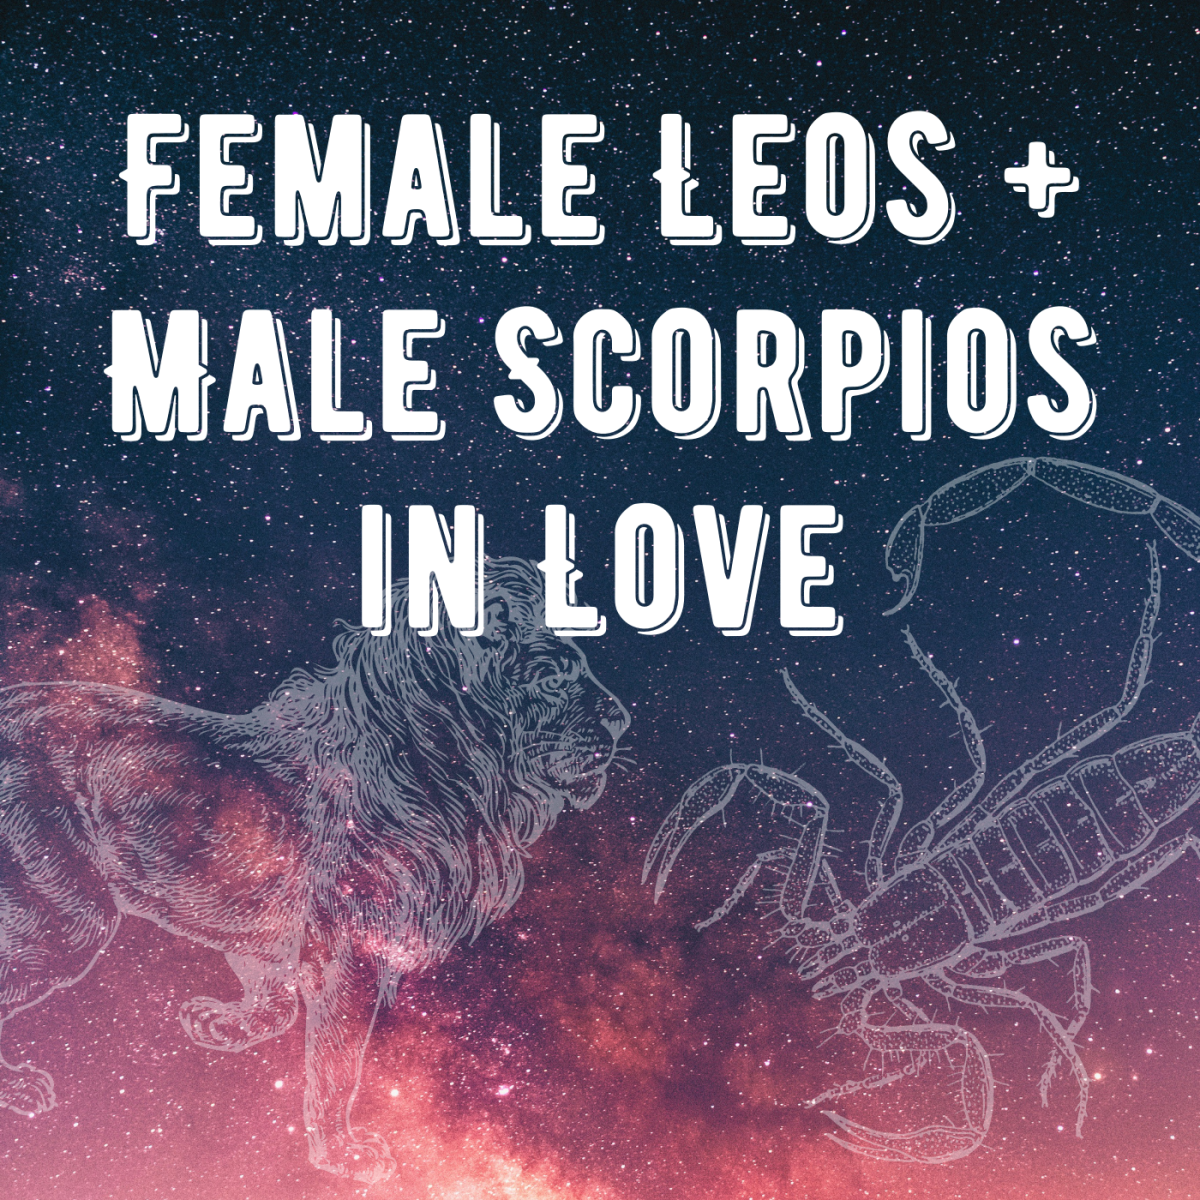 Do a lady Leo and a Scorpio man work well together in a relationship?